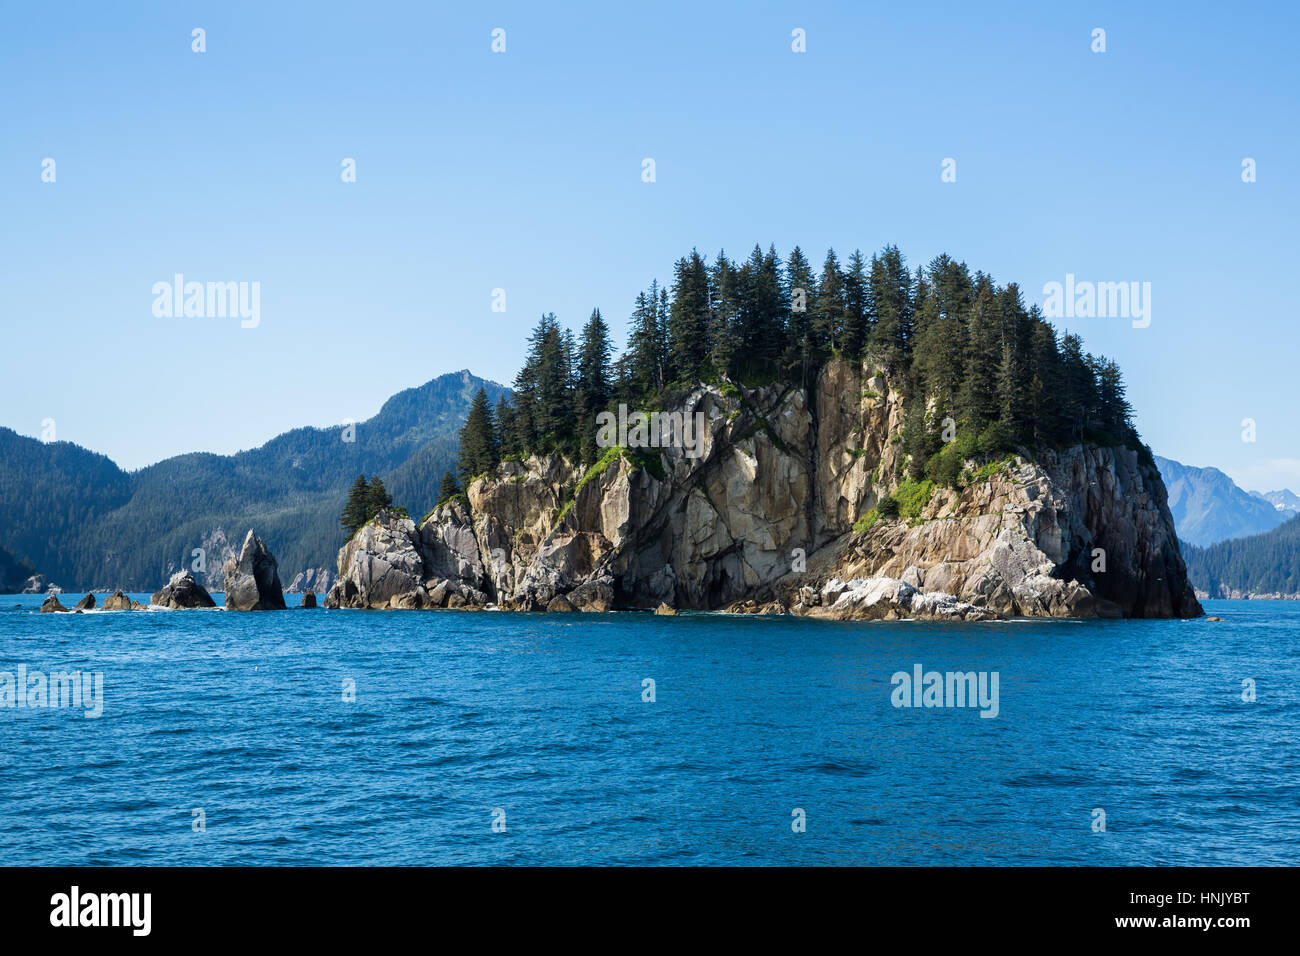 Small, steep, rocky island off the coast near Seward, Alaska. The island is covered on top with large evergreens and provides a refuge for many birds  Stock Photo